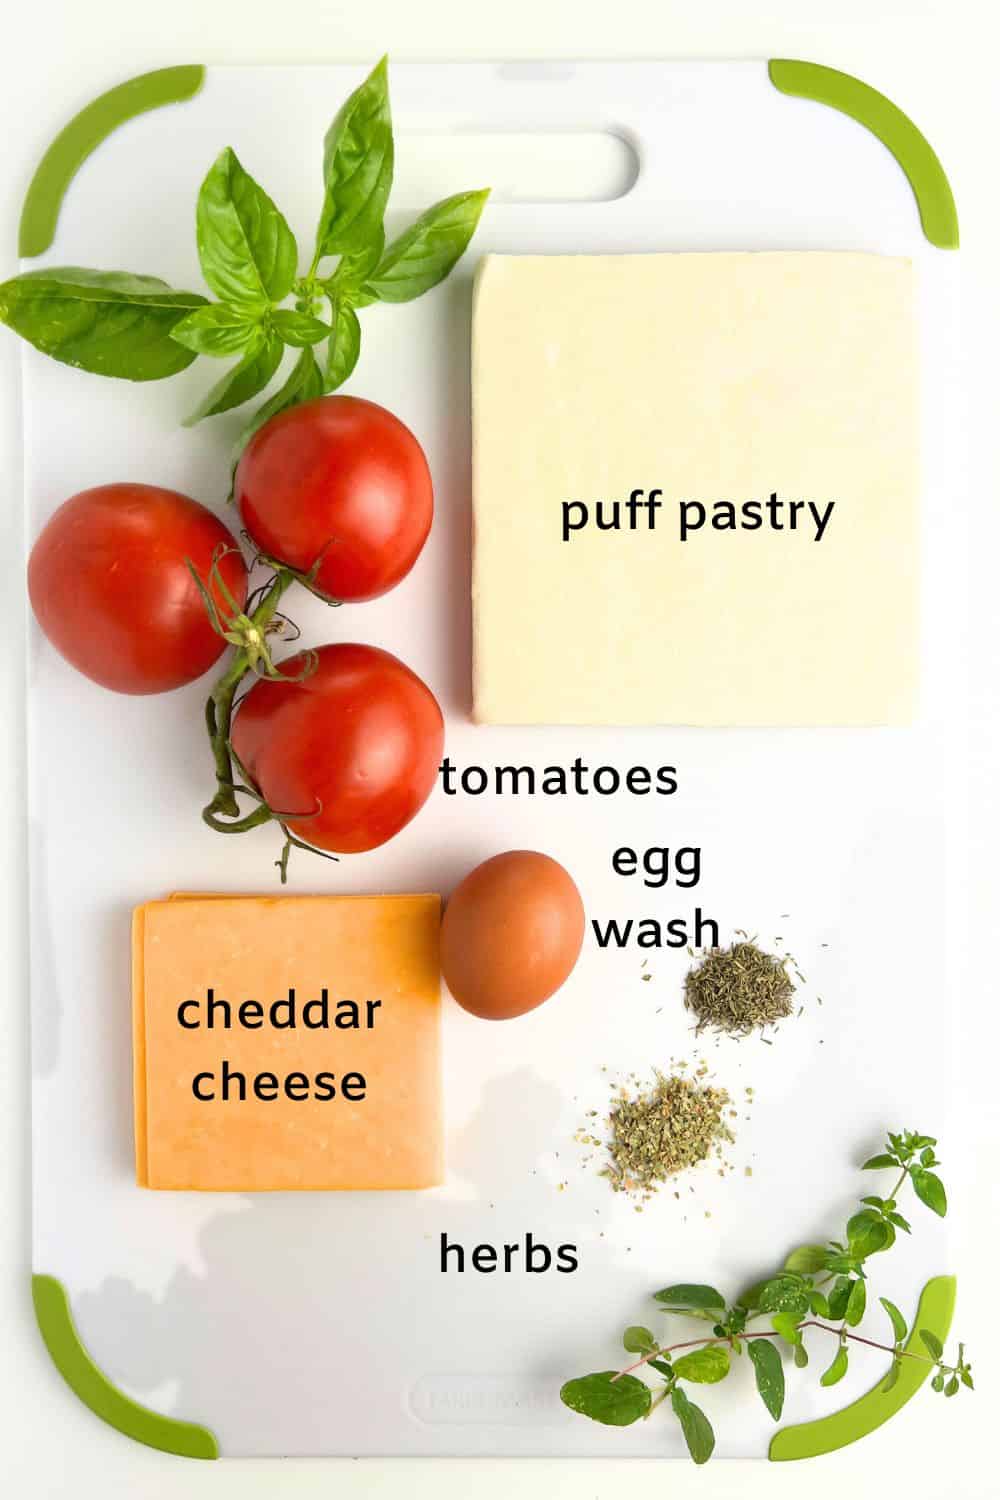 Ingredients for puff pastry cheese and tomato tarts: cheddar cheese, puff pastry, tomatoes, herbs, egg for an egg wash.